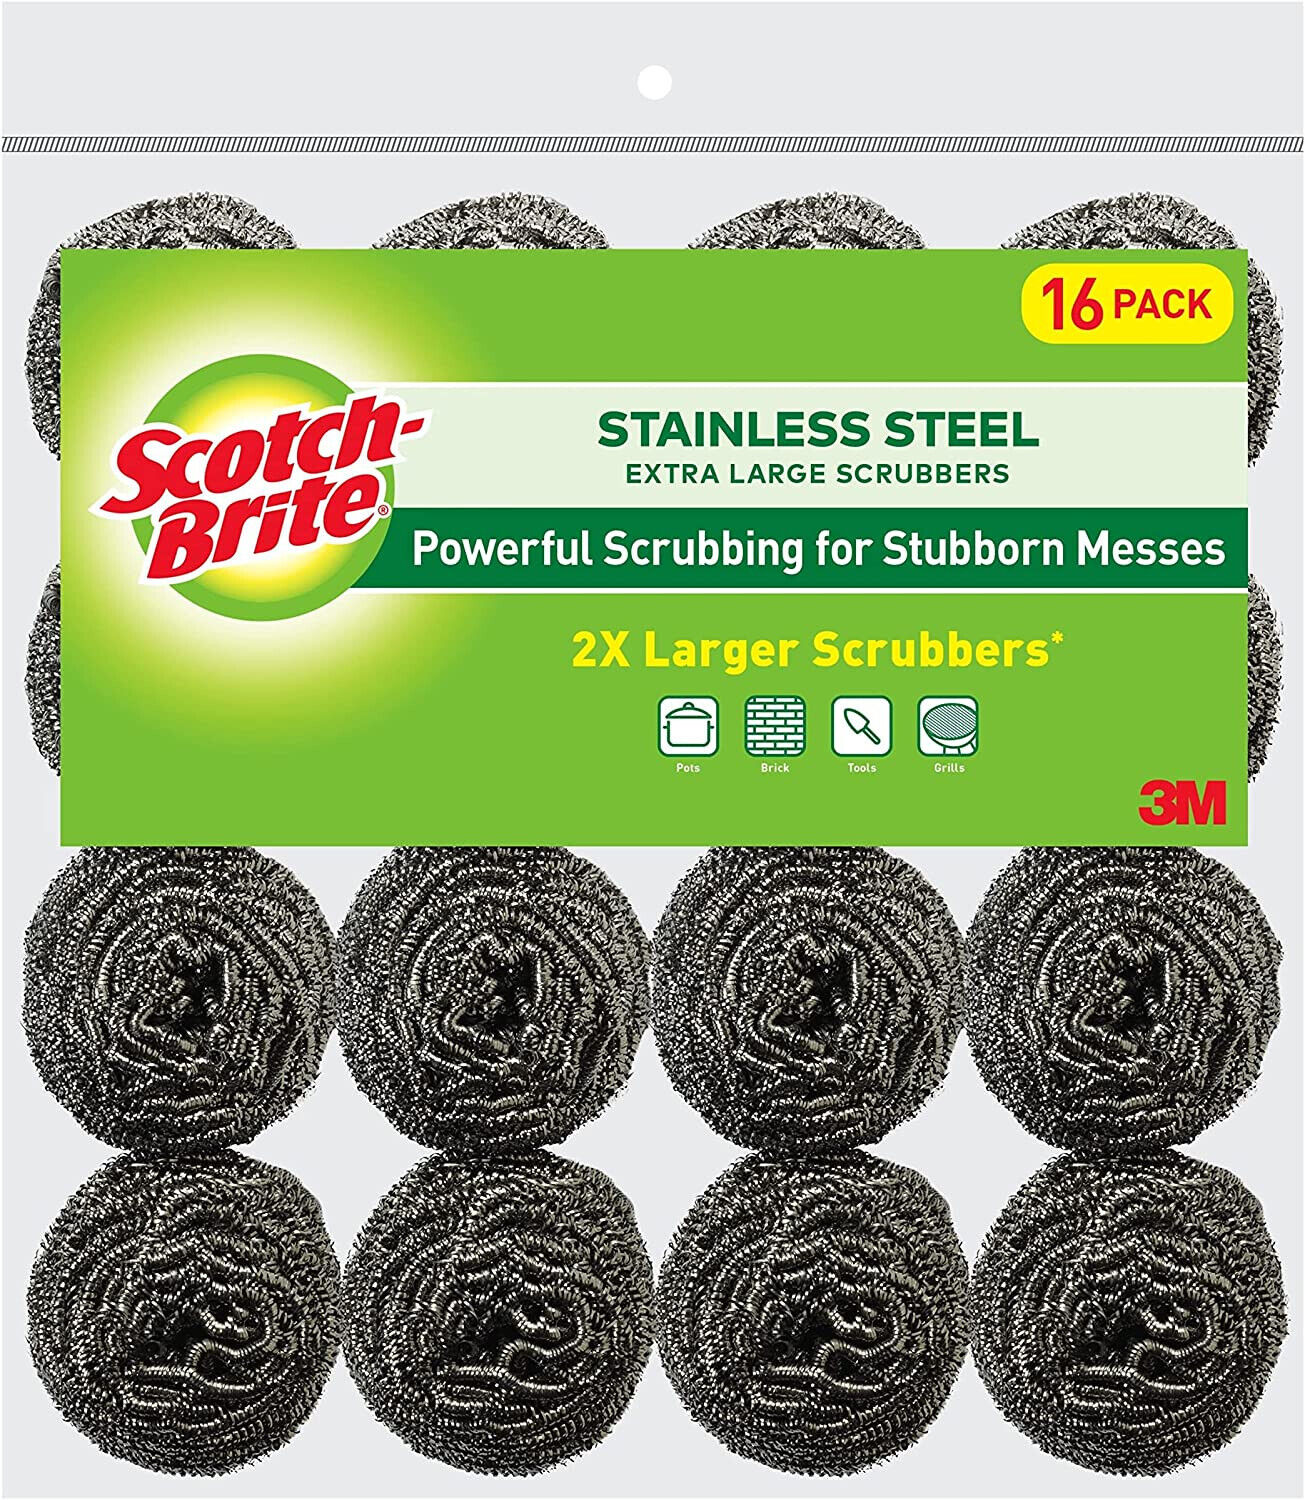 Scotch-Brite 2X Larger Stainless Steel Scrubbers (16-Pack)